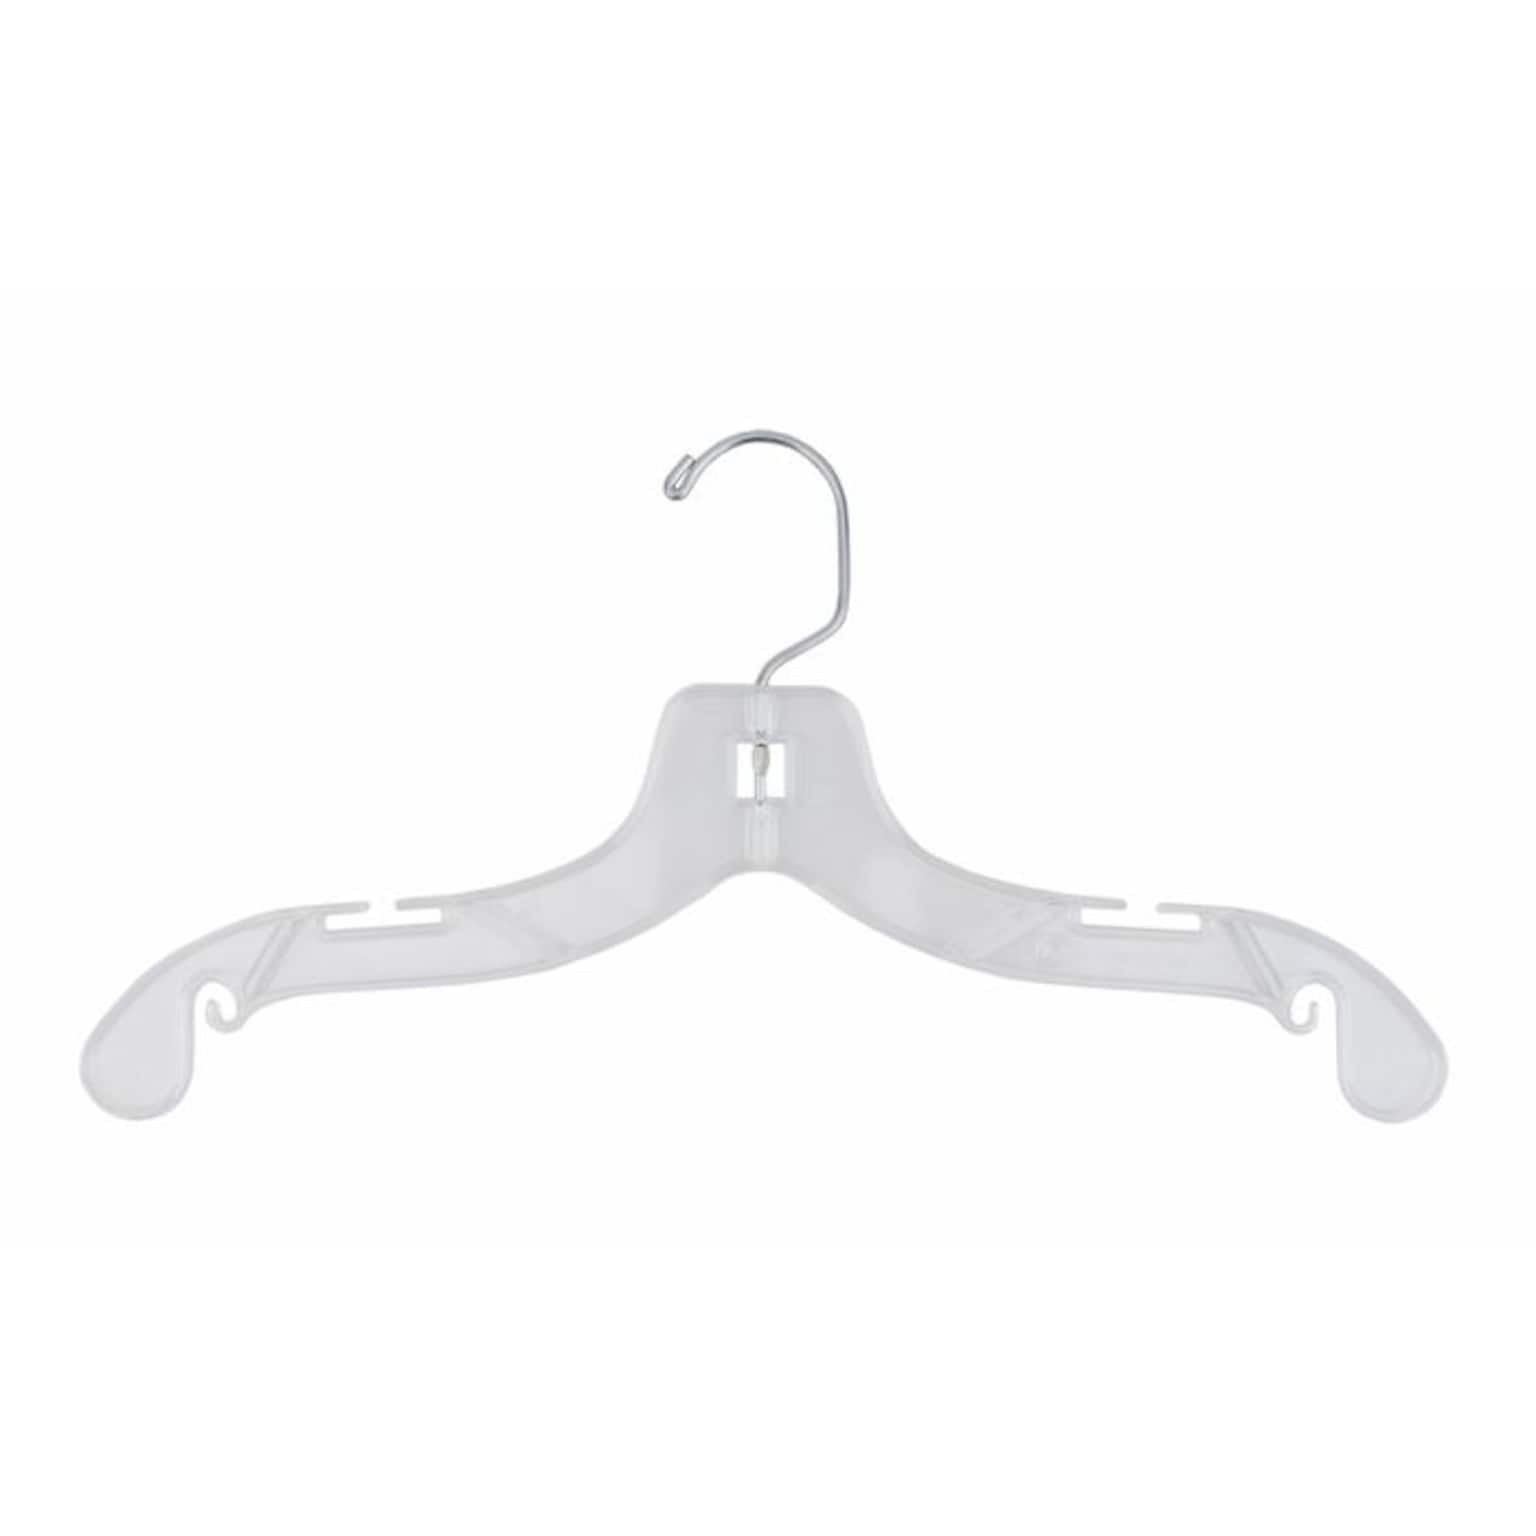 NAHANCO 14 Plastic Super Heavy Weight Dress Hanger, Clear, 100/Pack